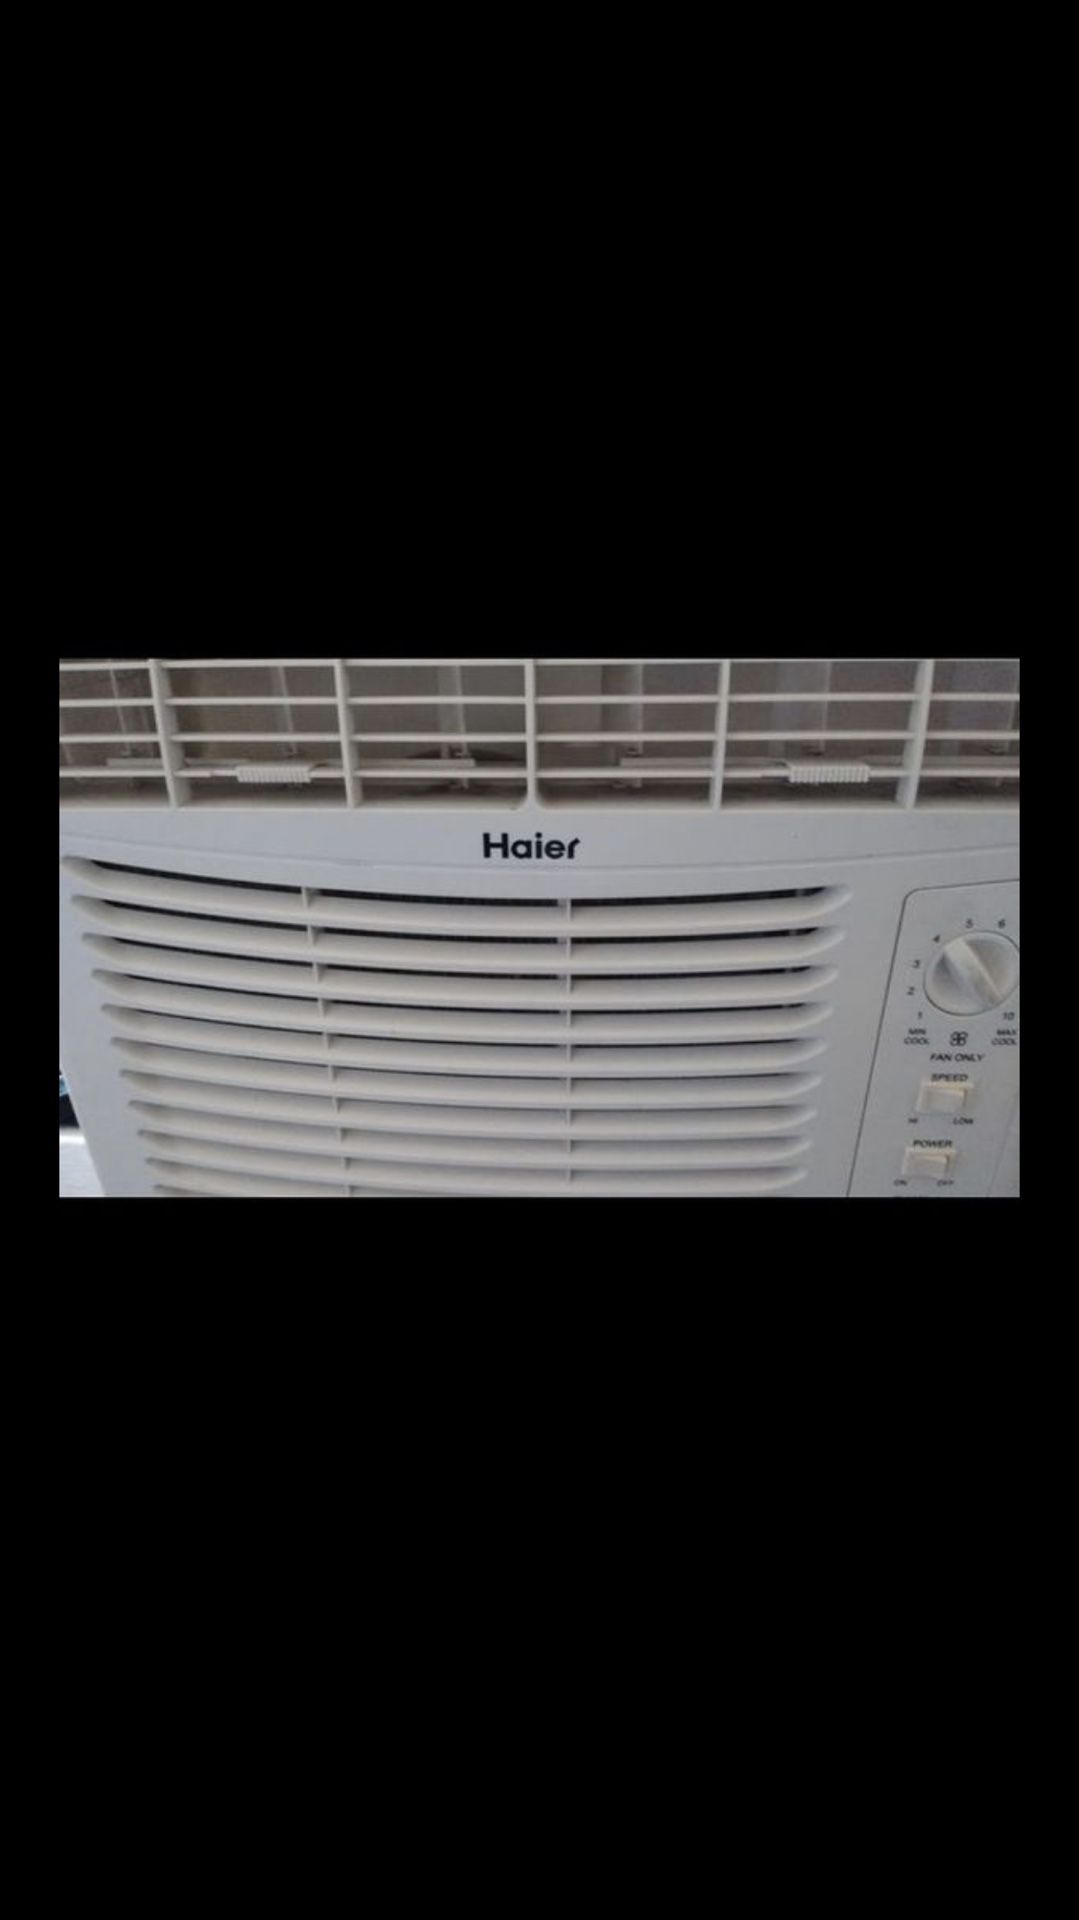 I’m trying to sell my AC it’s a window air conditioner in good condition for 44